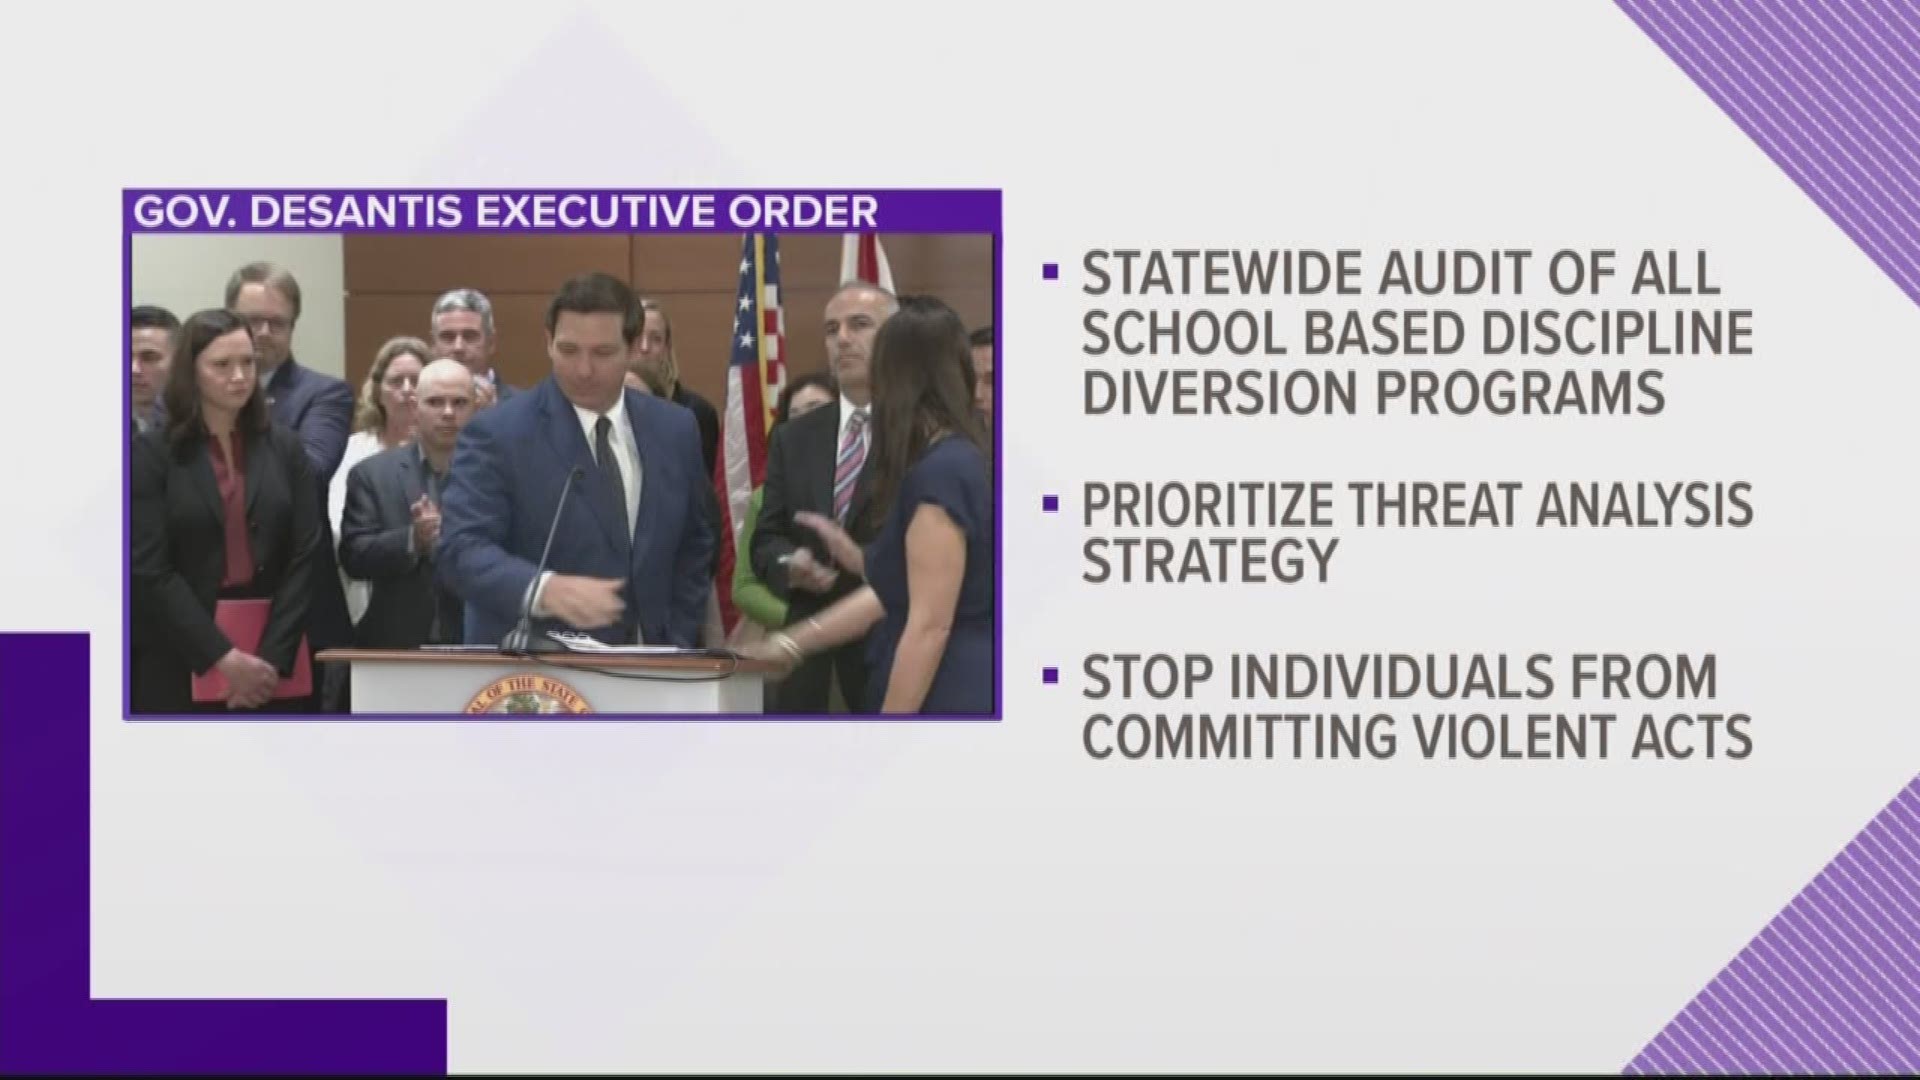 Executive Order 19-45 aims at being more proactive in school safety, rather than reactive.